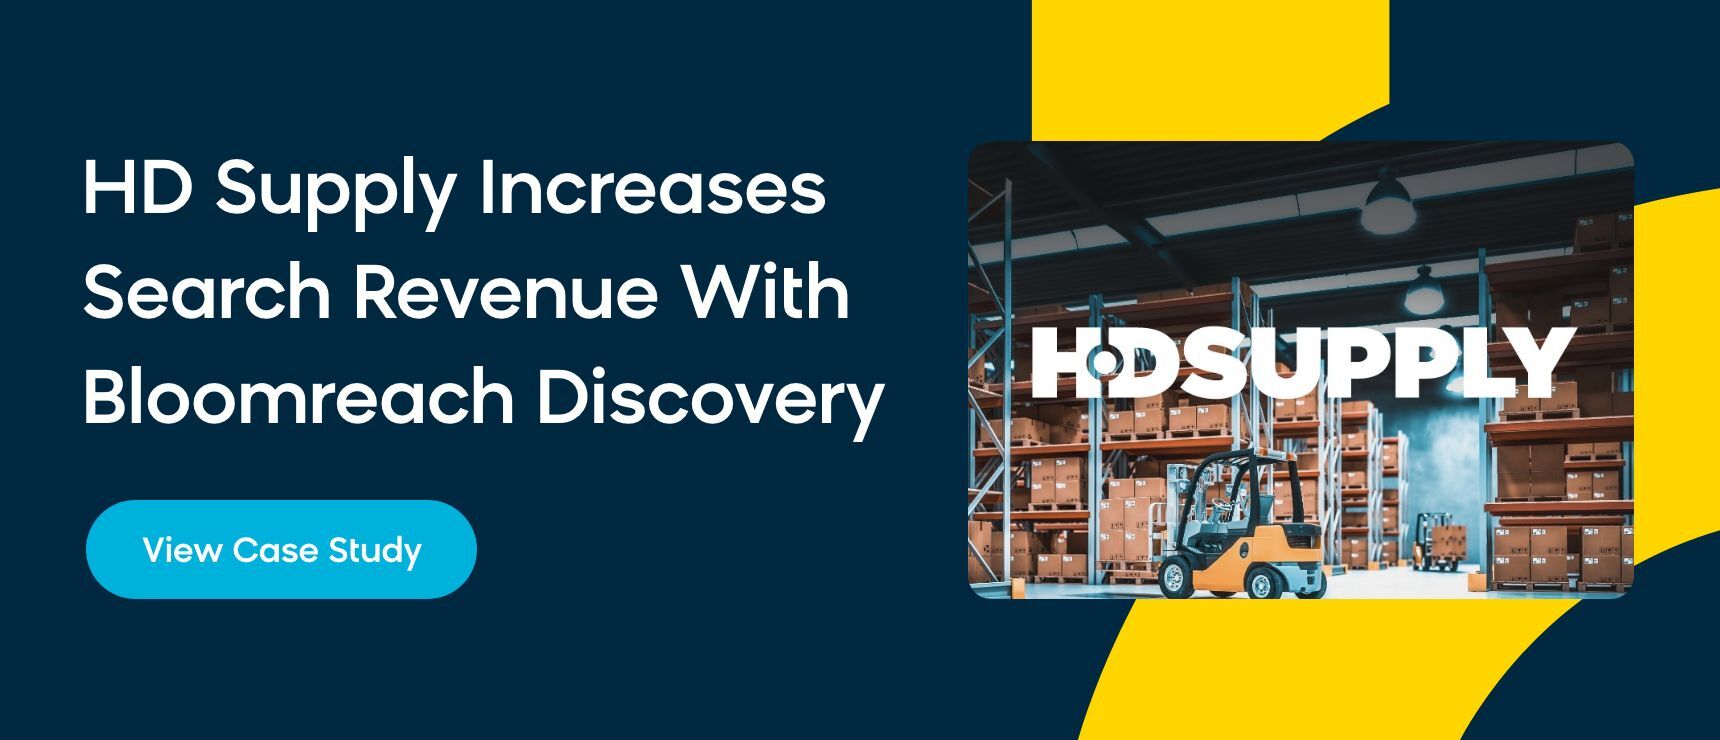 HD Supply and Bloomreach case study